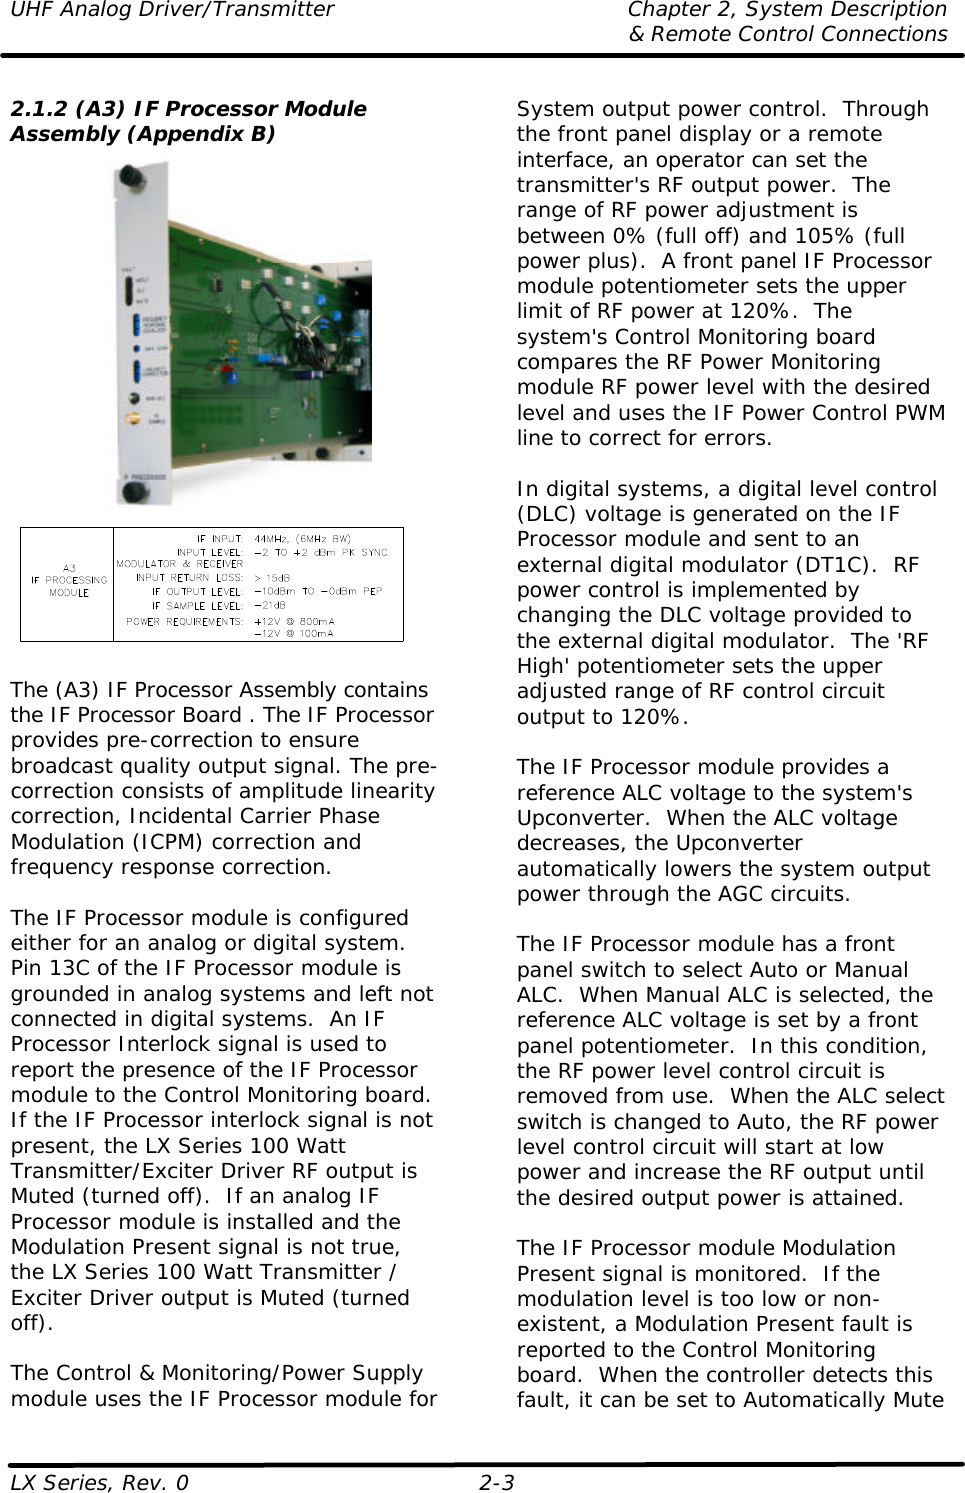 UHF Analog Driver/Transmitter Chapter 2, System Description  &amp; Remote Control Connections LX Series, Rev. 0 2-3   2.1.2 (A3) IF Processor Module Assembly (Appendix B)    The (A3) IF Processor Assembly contains the IF Processor Board . The IF Processor provides pre-correction to ensure broadcast quality output signal. The pre-correction consists of amplitude linearity correction, Incidental Carrier Phase Modulation (ICPM) correction and frequency response correction.  The IF Processor module is configured either for an analog or digital system.  Pin 13C of the IF Processor module is grounded in analog systems and left not connected in digital systems.  An IF Processor Interlock signal is used to report the presence of the IF Processor module to the Control Monitoring board.  If the IF Processor interlock signal is not present, the LX Series 100 Watt Transmitter/Exciter Driver RF output is Muted (turned off).  If an analog IF Processor module is installed and the Modulation Present signal is not true, the LX Series 100 Watt Transmitter / Exciter Driver output is Muted (turned off).  The Control &amp; Monitoring/Power Supply module uses the IF Processor module for System output power control.  Through the front panel display or a remote interface, an operator can set the transmitter&apos;s RF output power.  The range of RF power adjustment is between 0% (full off) and 105% (full power plus).  A front panel IF Processor module potentiometer sets the upper limit of RF power at 120%.  The system&apos;s Control Monitoring board compares the RF Power Monitoring module RF power level with the desired level and uses the IF Power Control PWM line to correct for errors.   In digital systems, a digital level control (DLC) voltage is generated on the IF Processor module and sent to an external digital modulator (DT1C).  RF power control is implemented by changing the DLC voltage provided to the external digital modulator.  The &apos;RF High&apos; potentiometer sets the upper adjusted range of RF control circuit output to 120%.   The IF Processor module provides a reference ALC voltage to the system&apos;s Upconverter.  When the ALC voltage decreases, the Upconverter automatically lowers the system output power through the AGC circuits.  The IF Processor module has a front panel switch to select Auto or Manual ALC.  When Manual ALC is selected, the reference ALC voltage is set by a front panel potentiometer.  In this condition, the RF power level control circuit is removed from use.  When the ALC select switch is changed to Auto, the RF power level control circuit will start at low power and increase the RF output until the desired output power is attained.  The IF Processor module Modulation Present signal is monitored.  If the modulation level is too low or non-existent, a Modulation Present fault is reported to the Control Monitoring board.  When the controller detects this fault, it can be set to Automatically Mute 